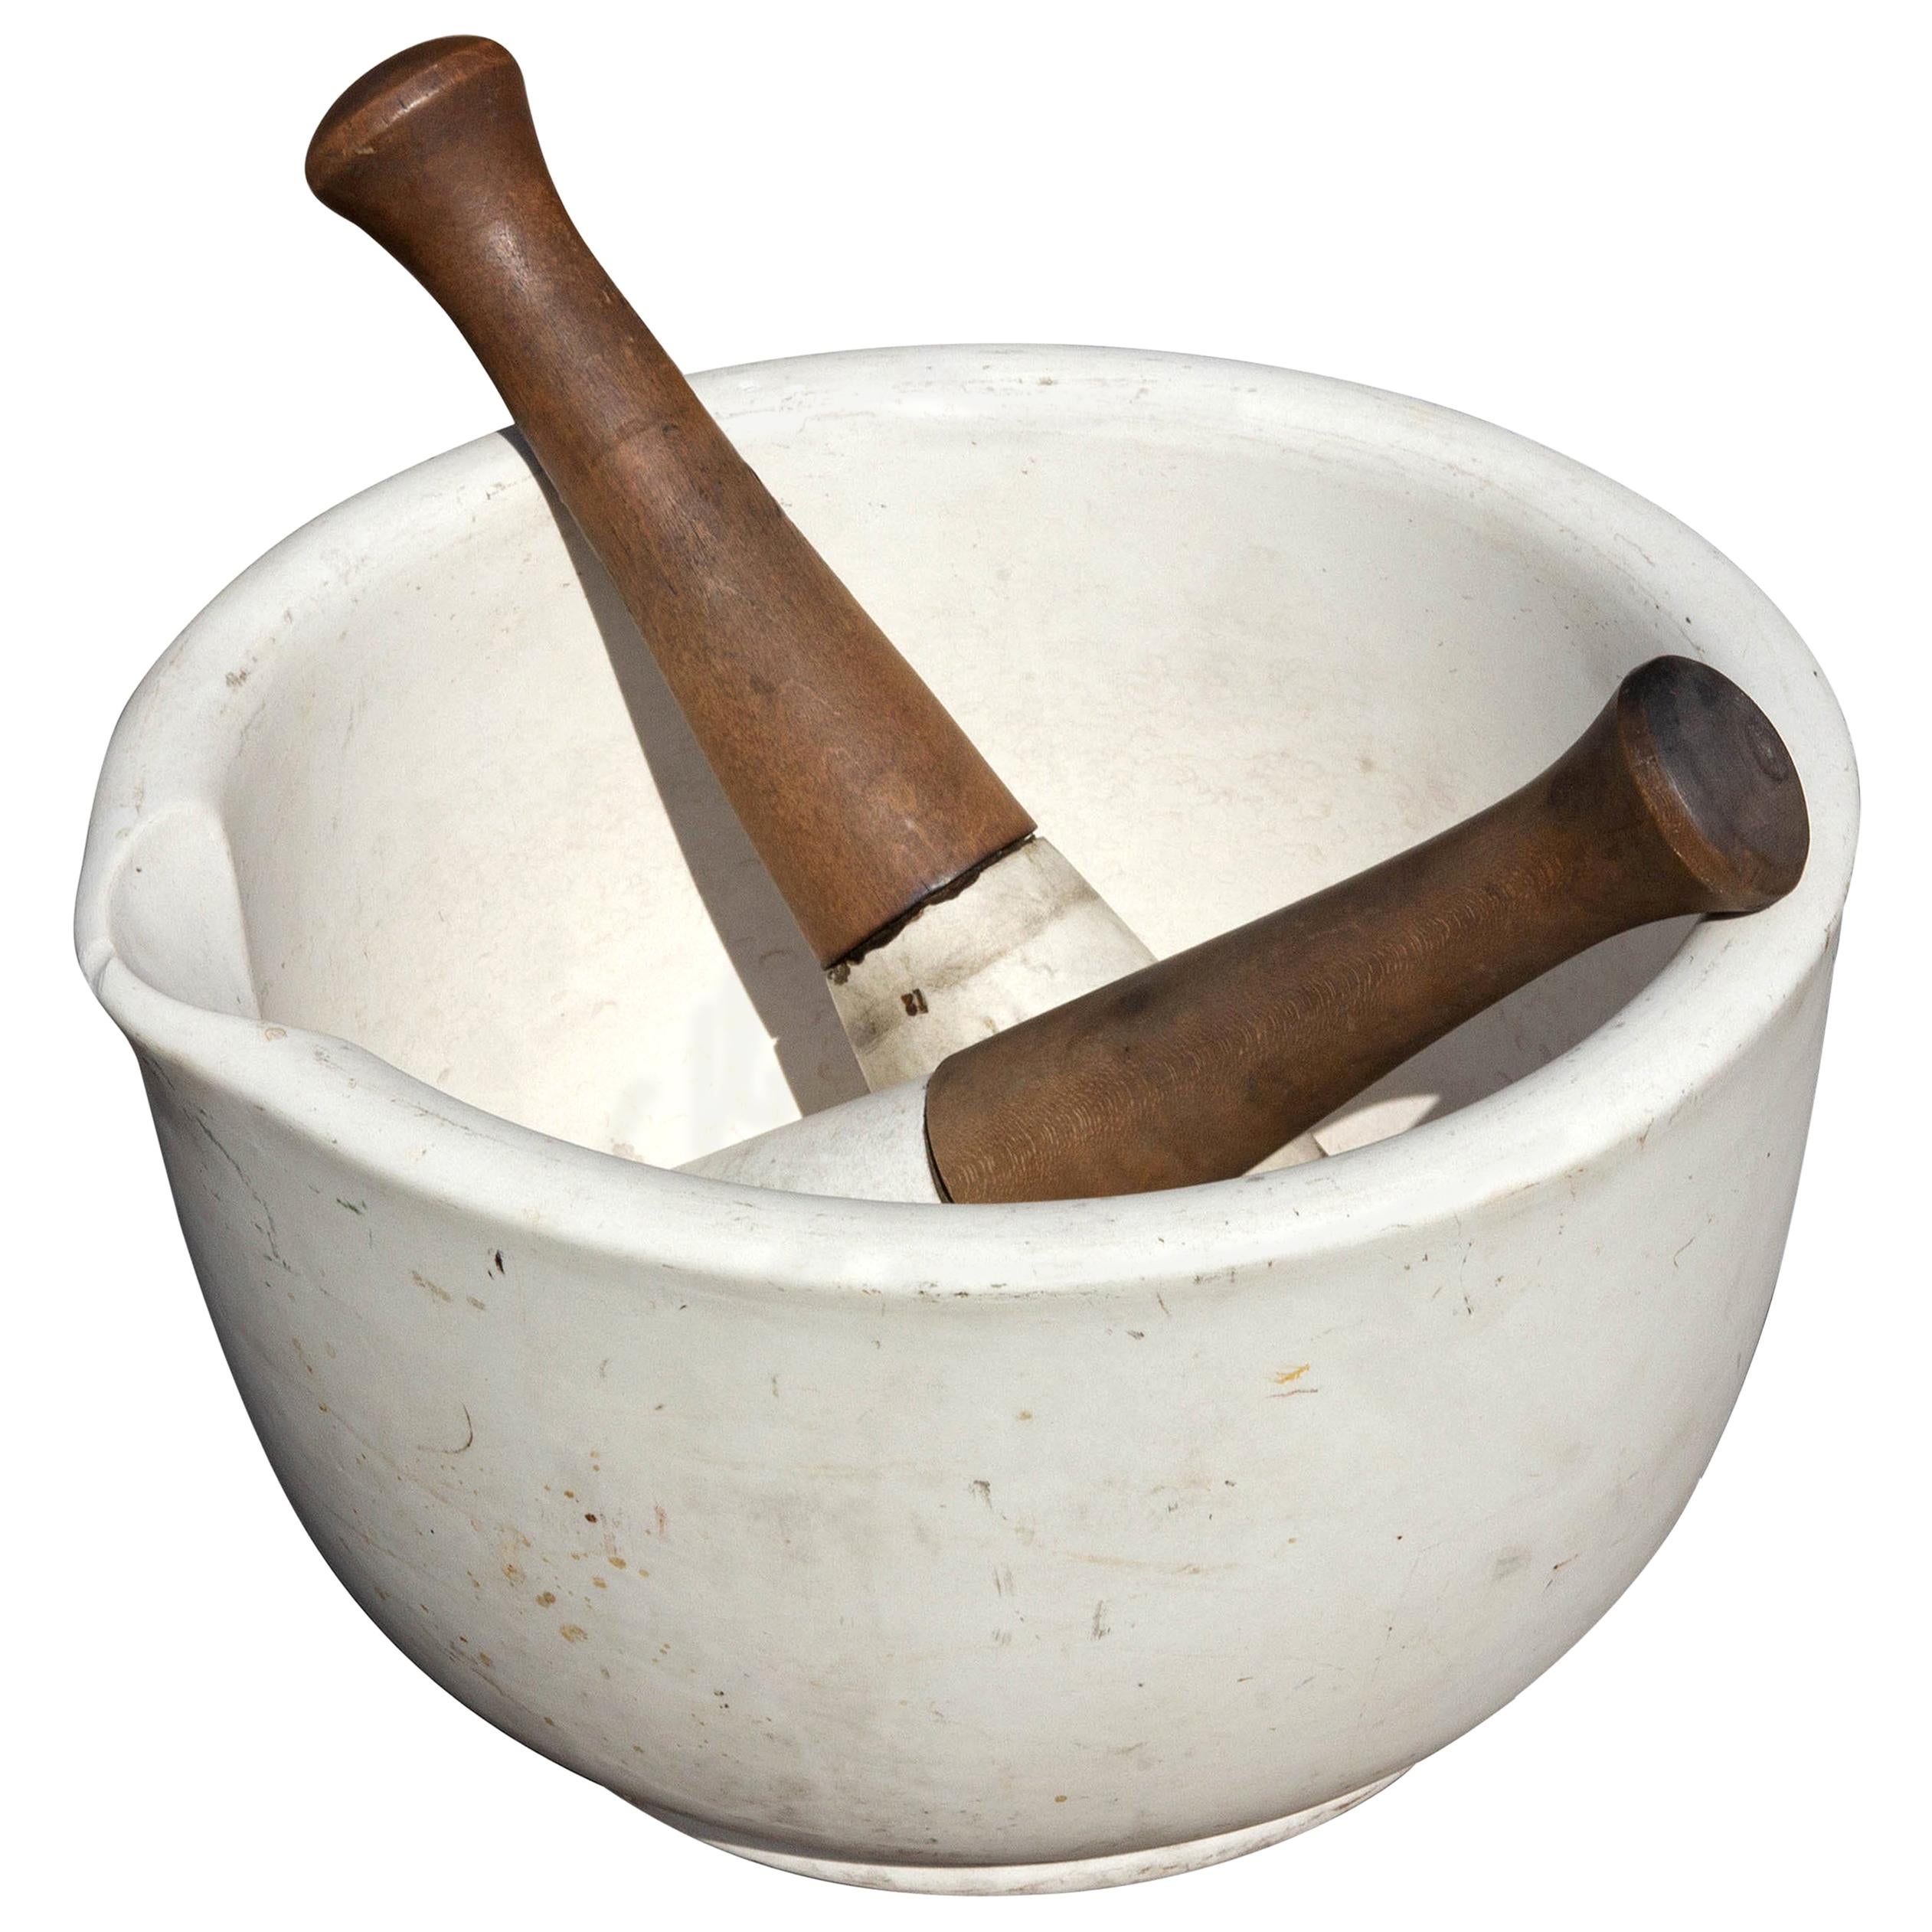 Mammoth Apothecary Mortar and Pestle